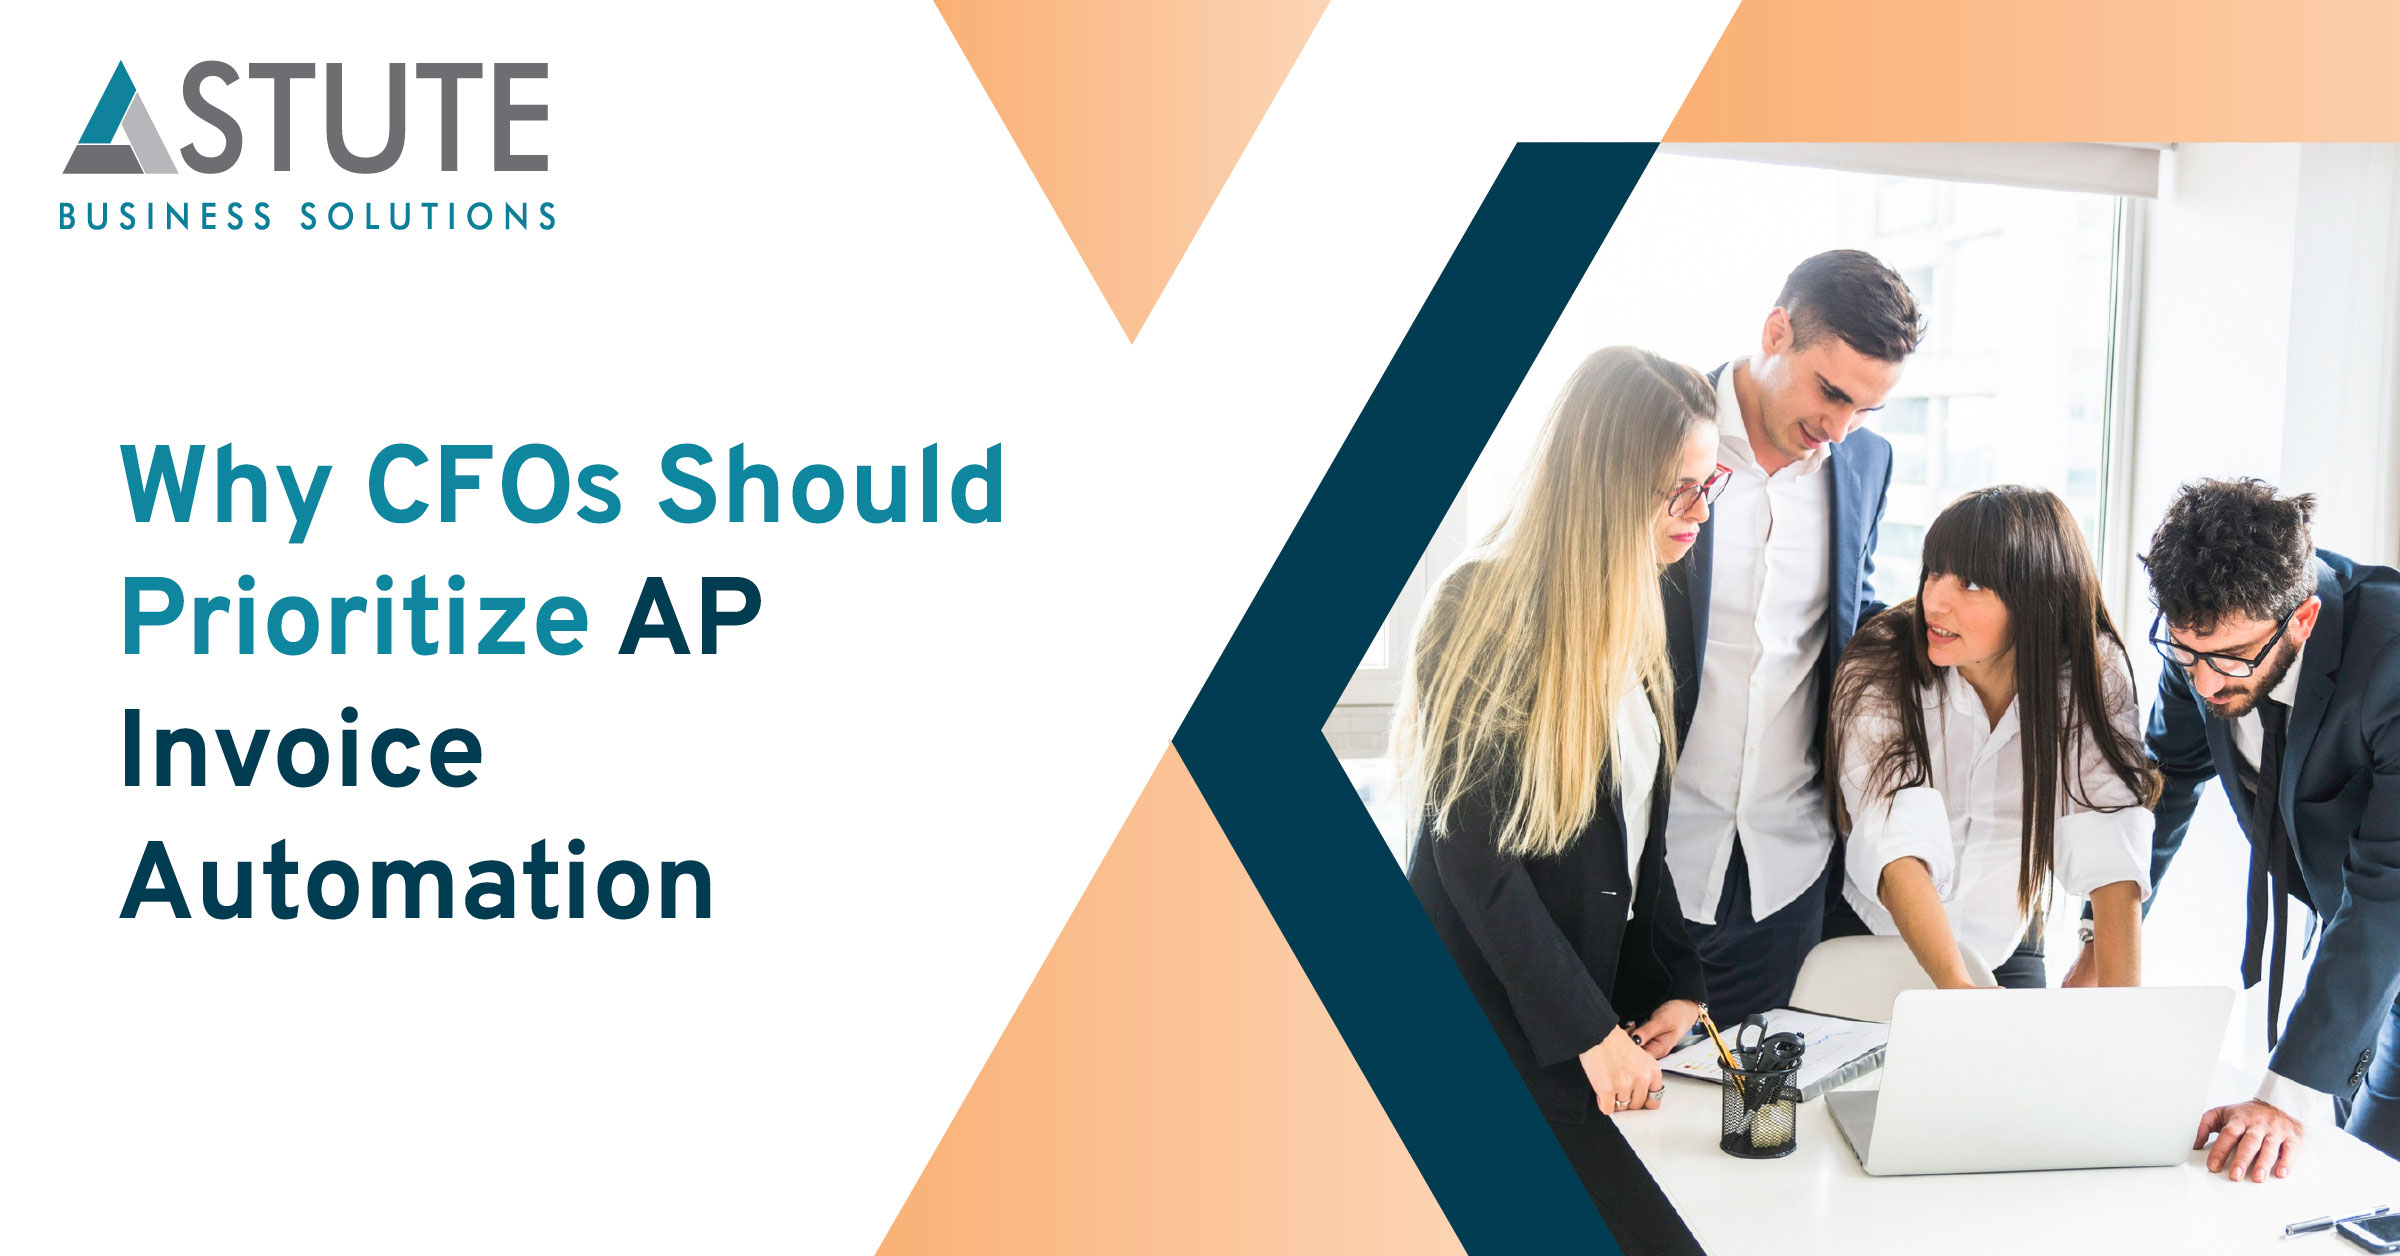 Why CFOs Should Prioritize AP Invoice Automation